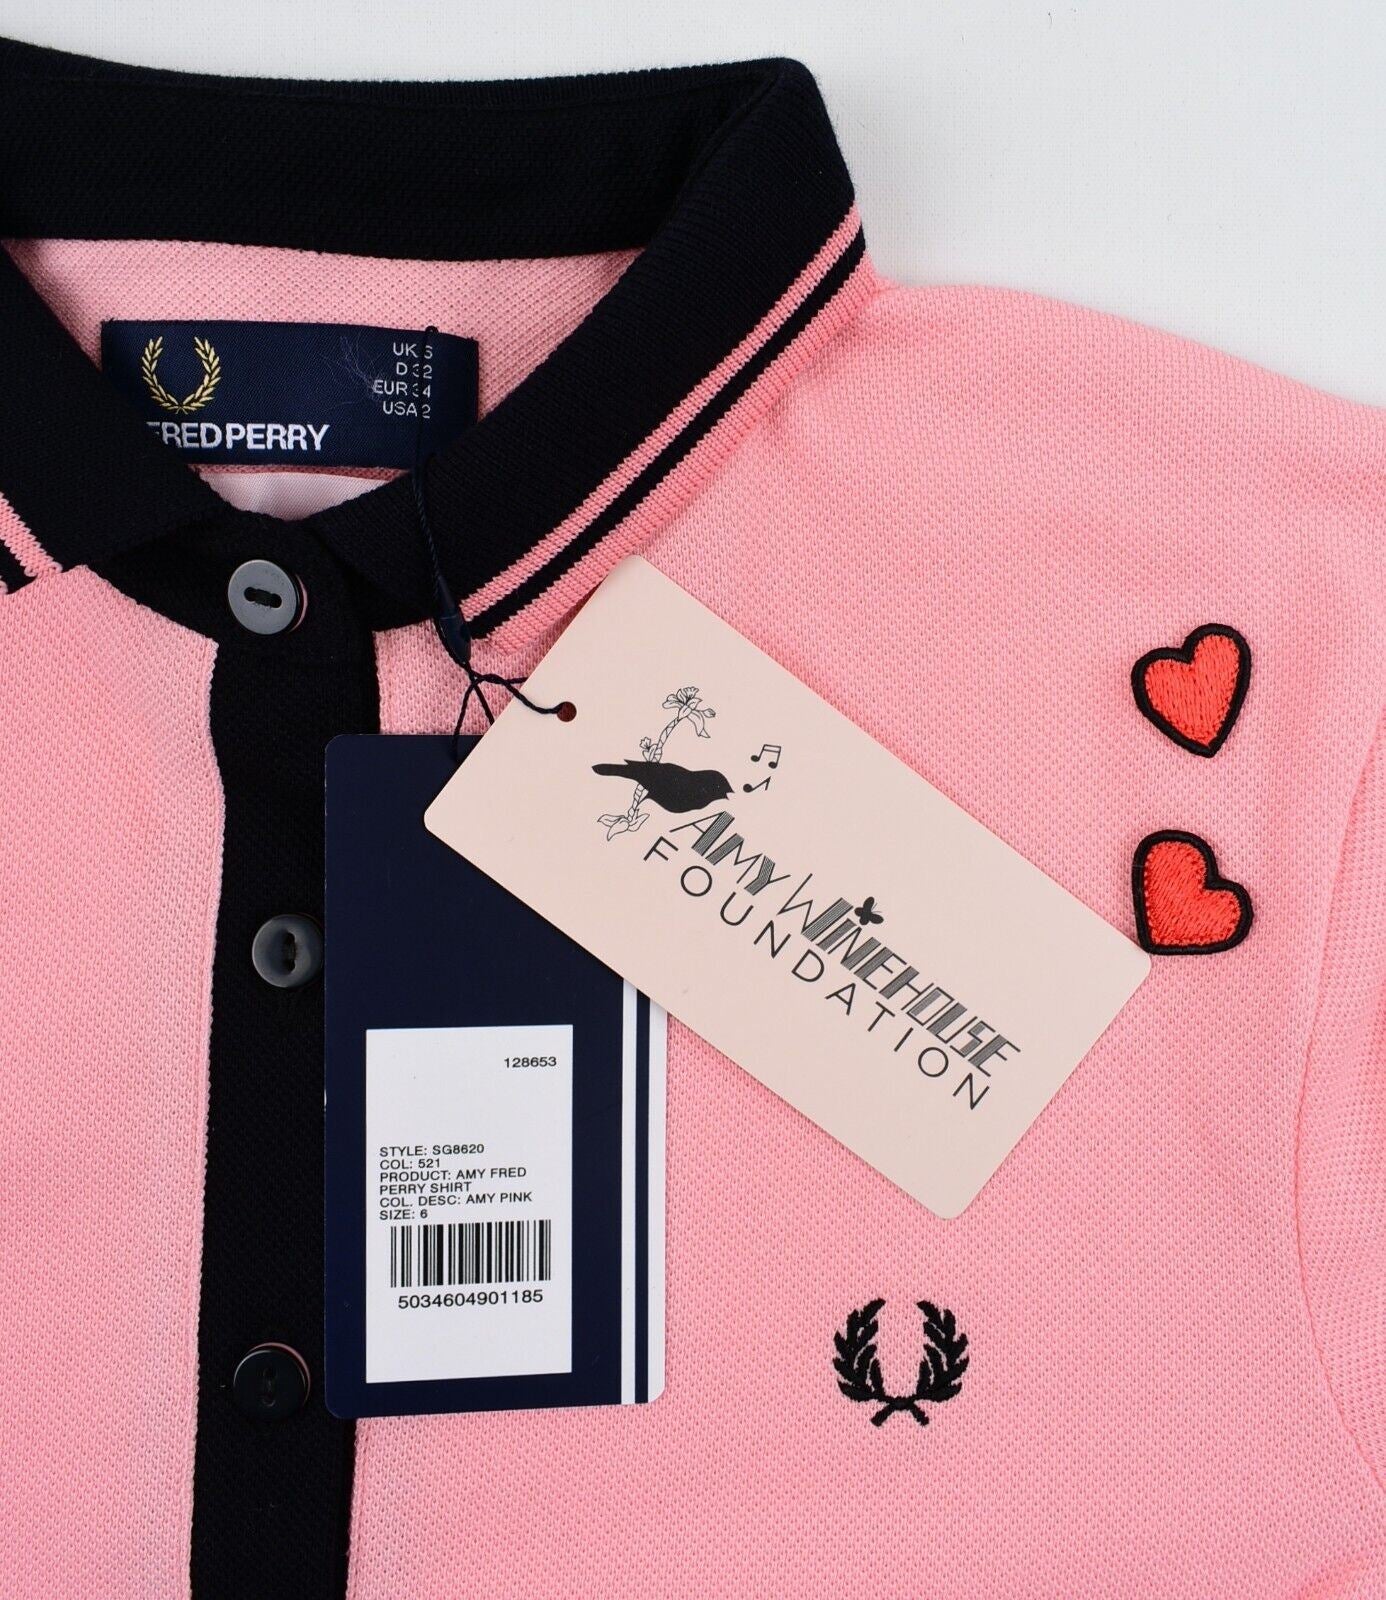 FRED PERRY x AMY WINEHOUSE FOUNDATION Womens Heart Polo Shirt , Pink, size UK 6